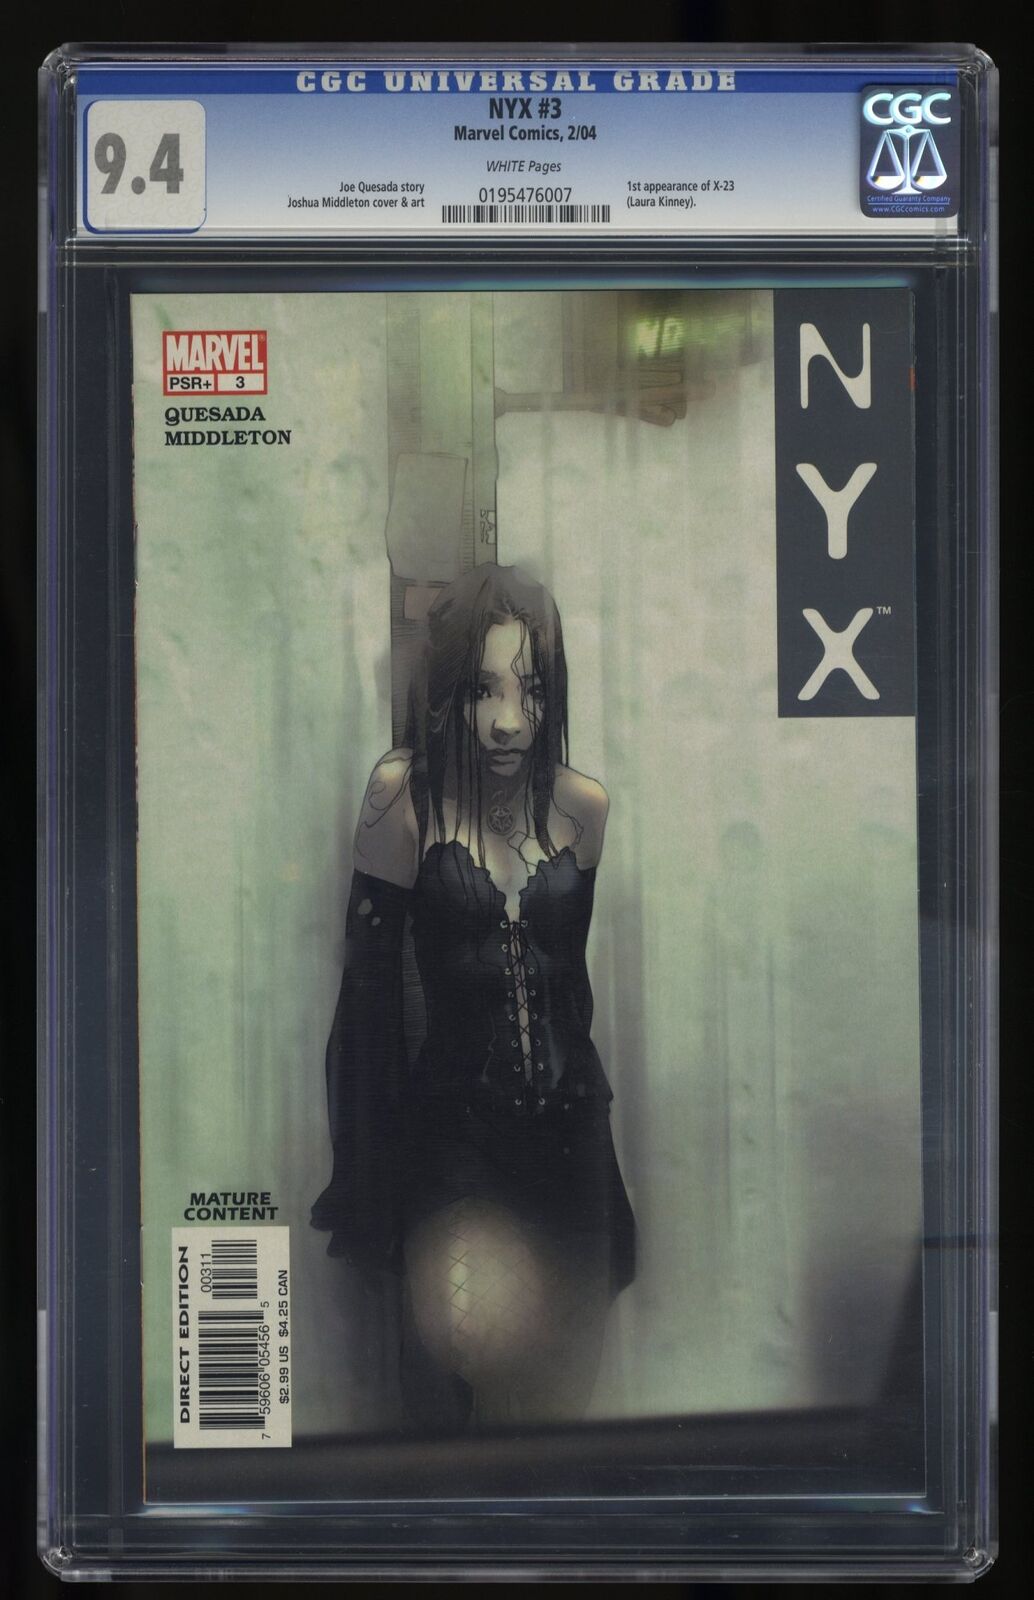 NYX #3 CGC NM 9.4 White Pages 1st Appearance X-23 (Laura Kinney) Marvel 2004